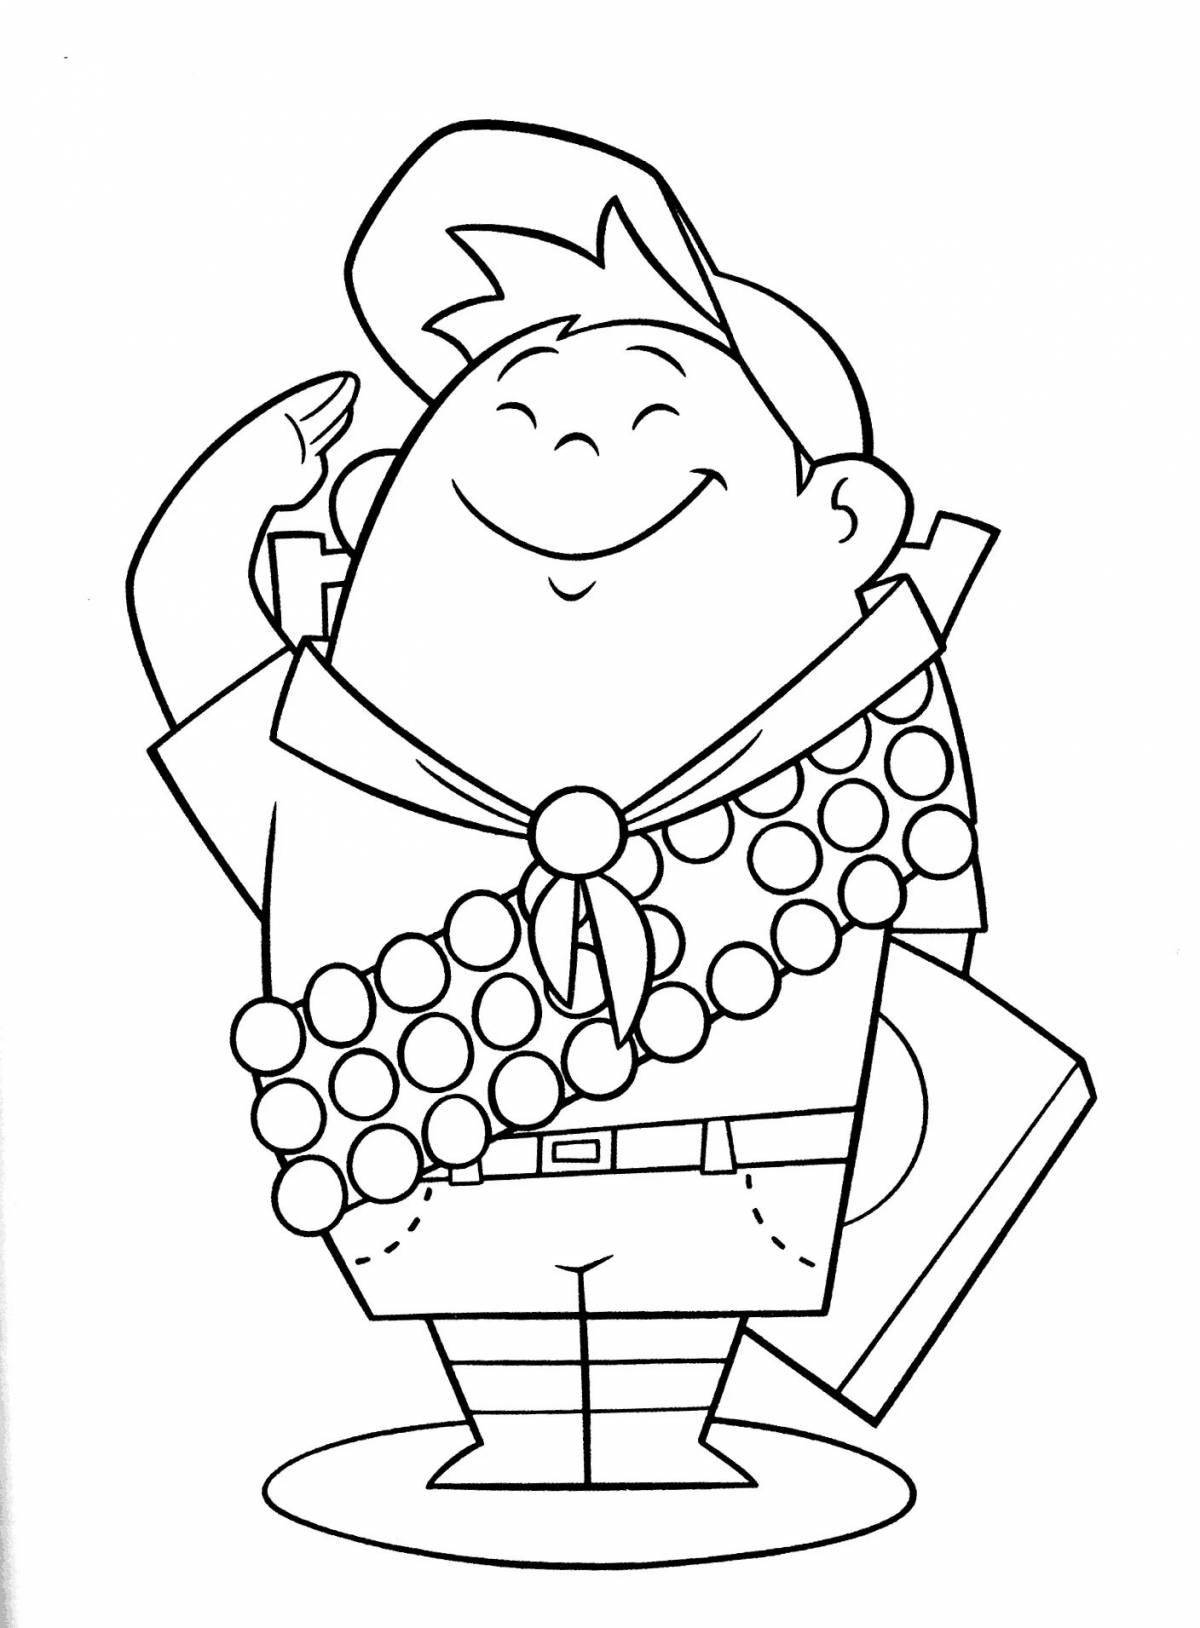 Fearless Pioneers coloring page